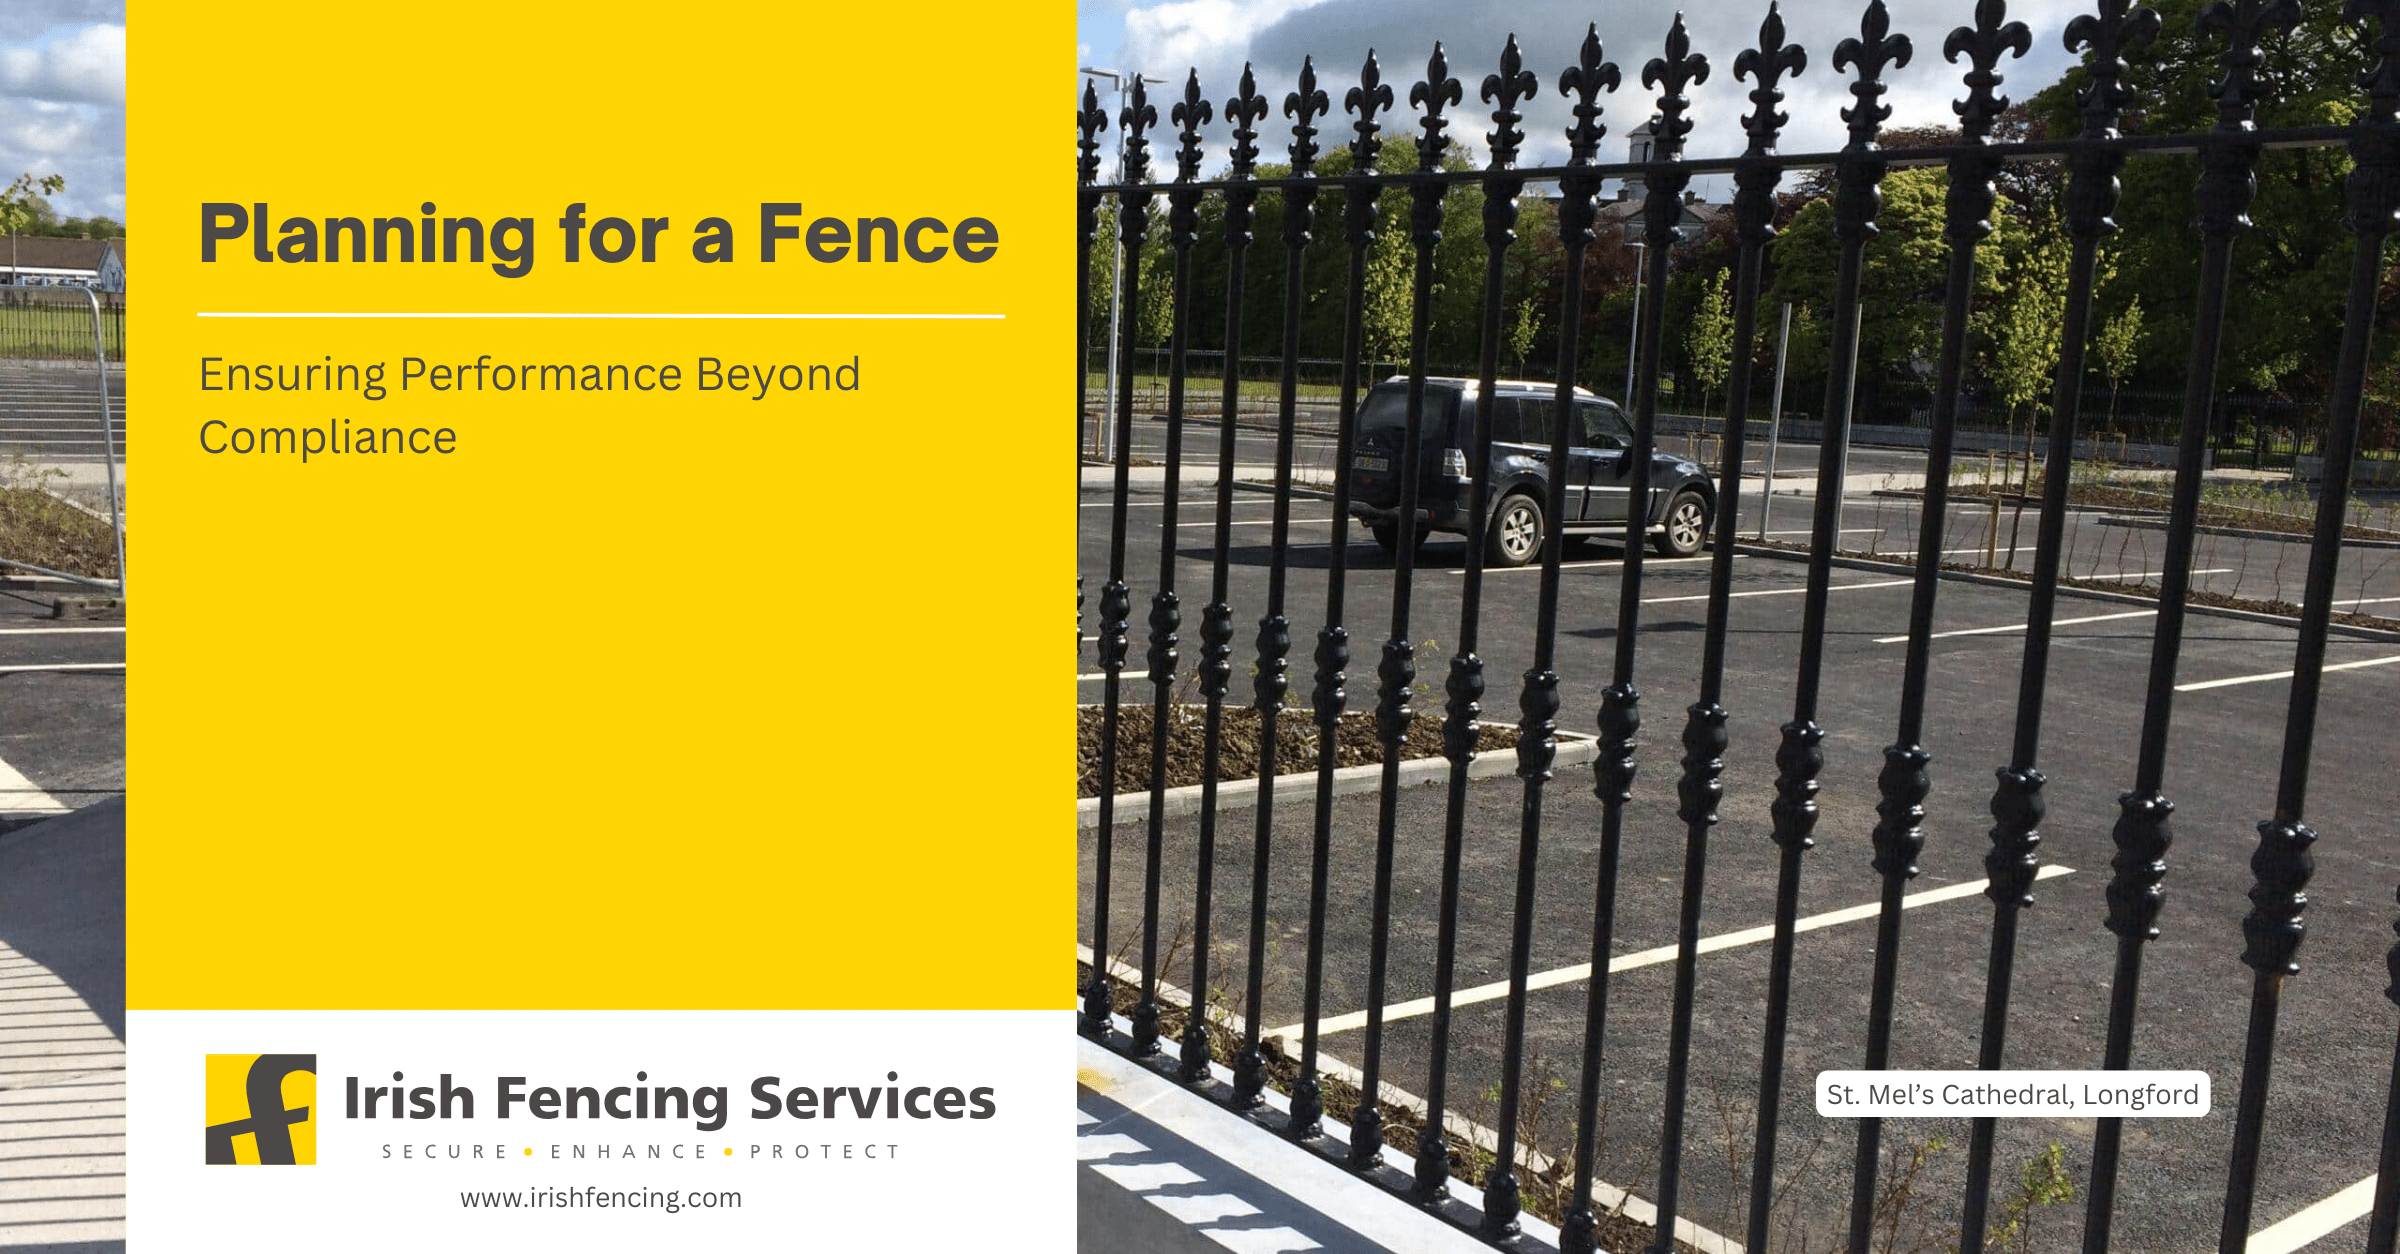 Planning for a Fence: Ensuring Performance Beyond Compliance